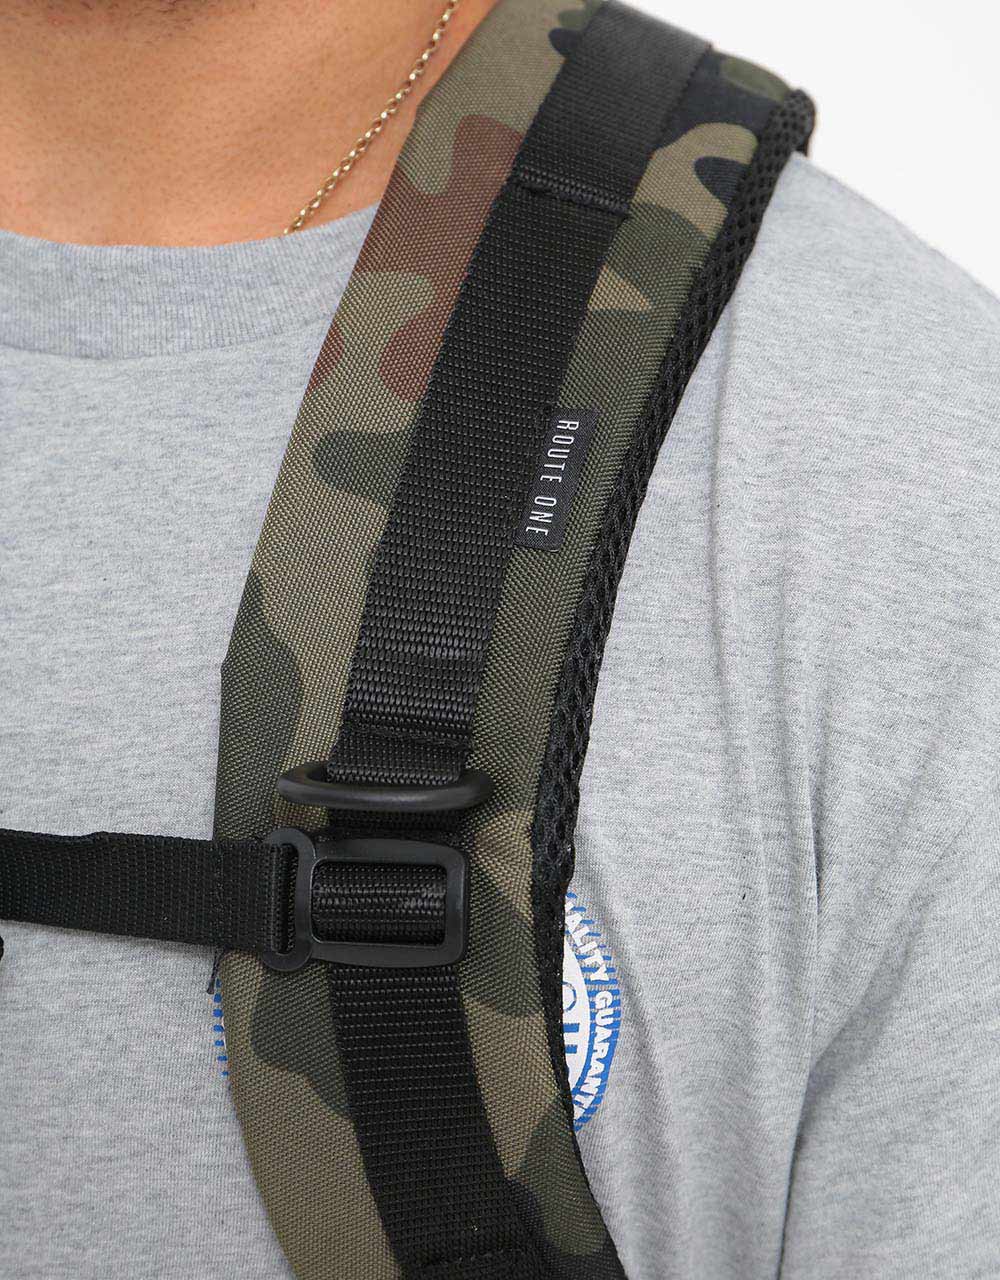 Route One Field Skatepack - Camo